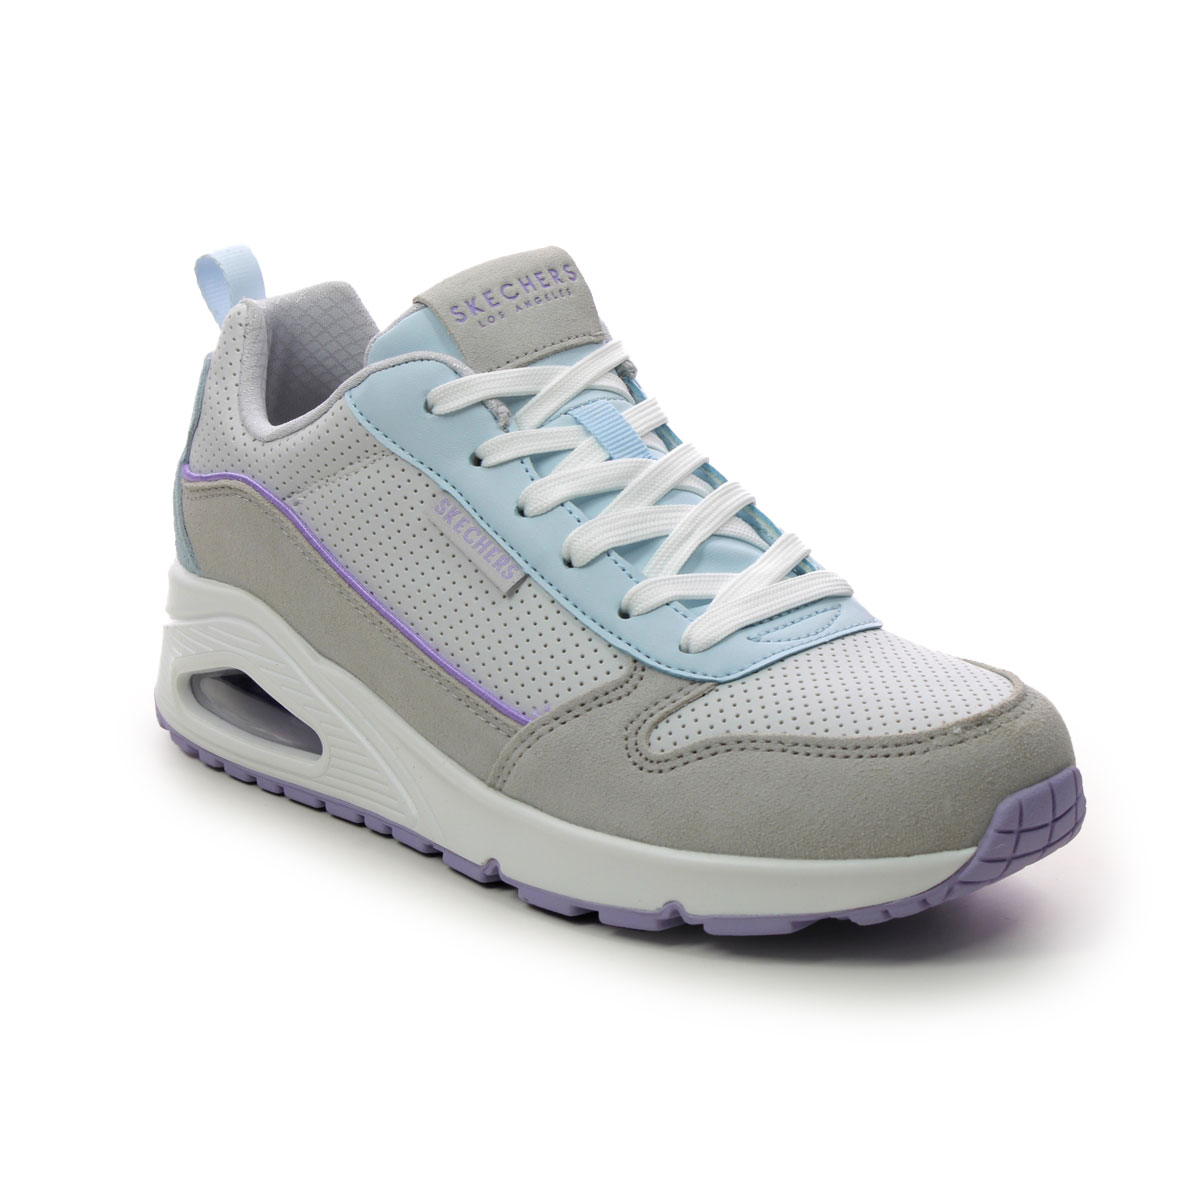 Skechers Uno Balance GYLB Grey Light Blue Womens trainers 177105 in a Plain Leather and Man-made in Size 7